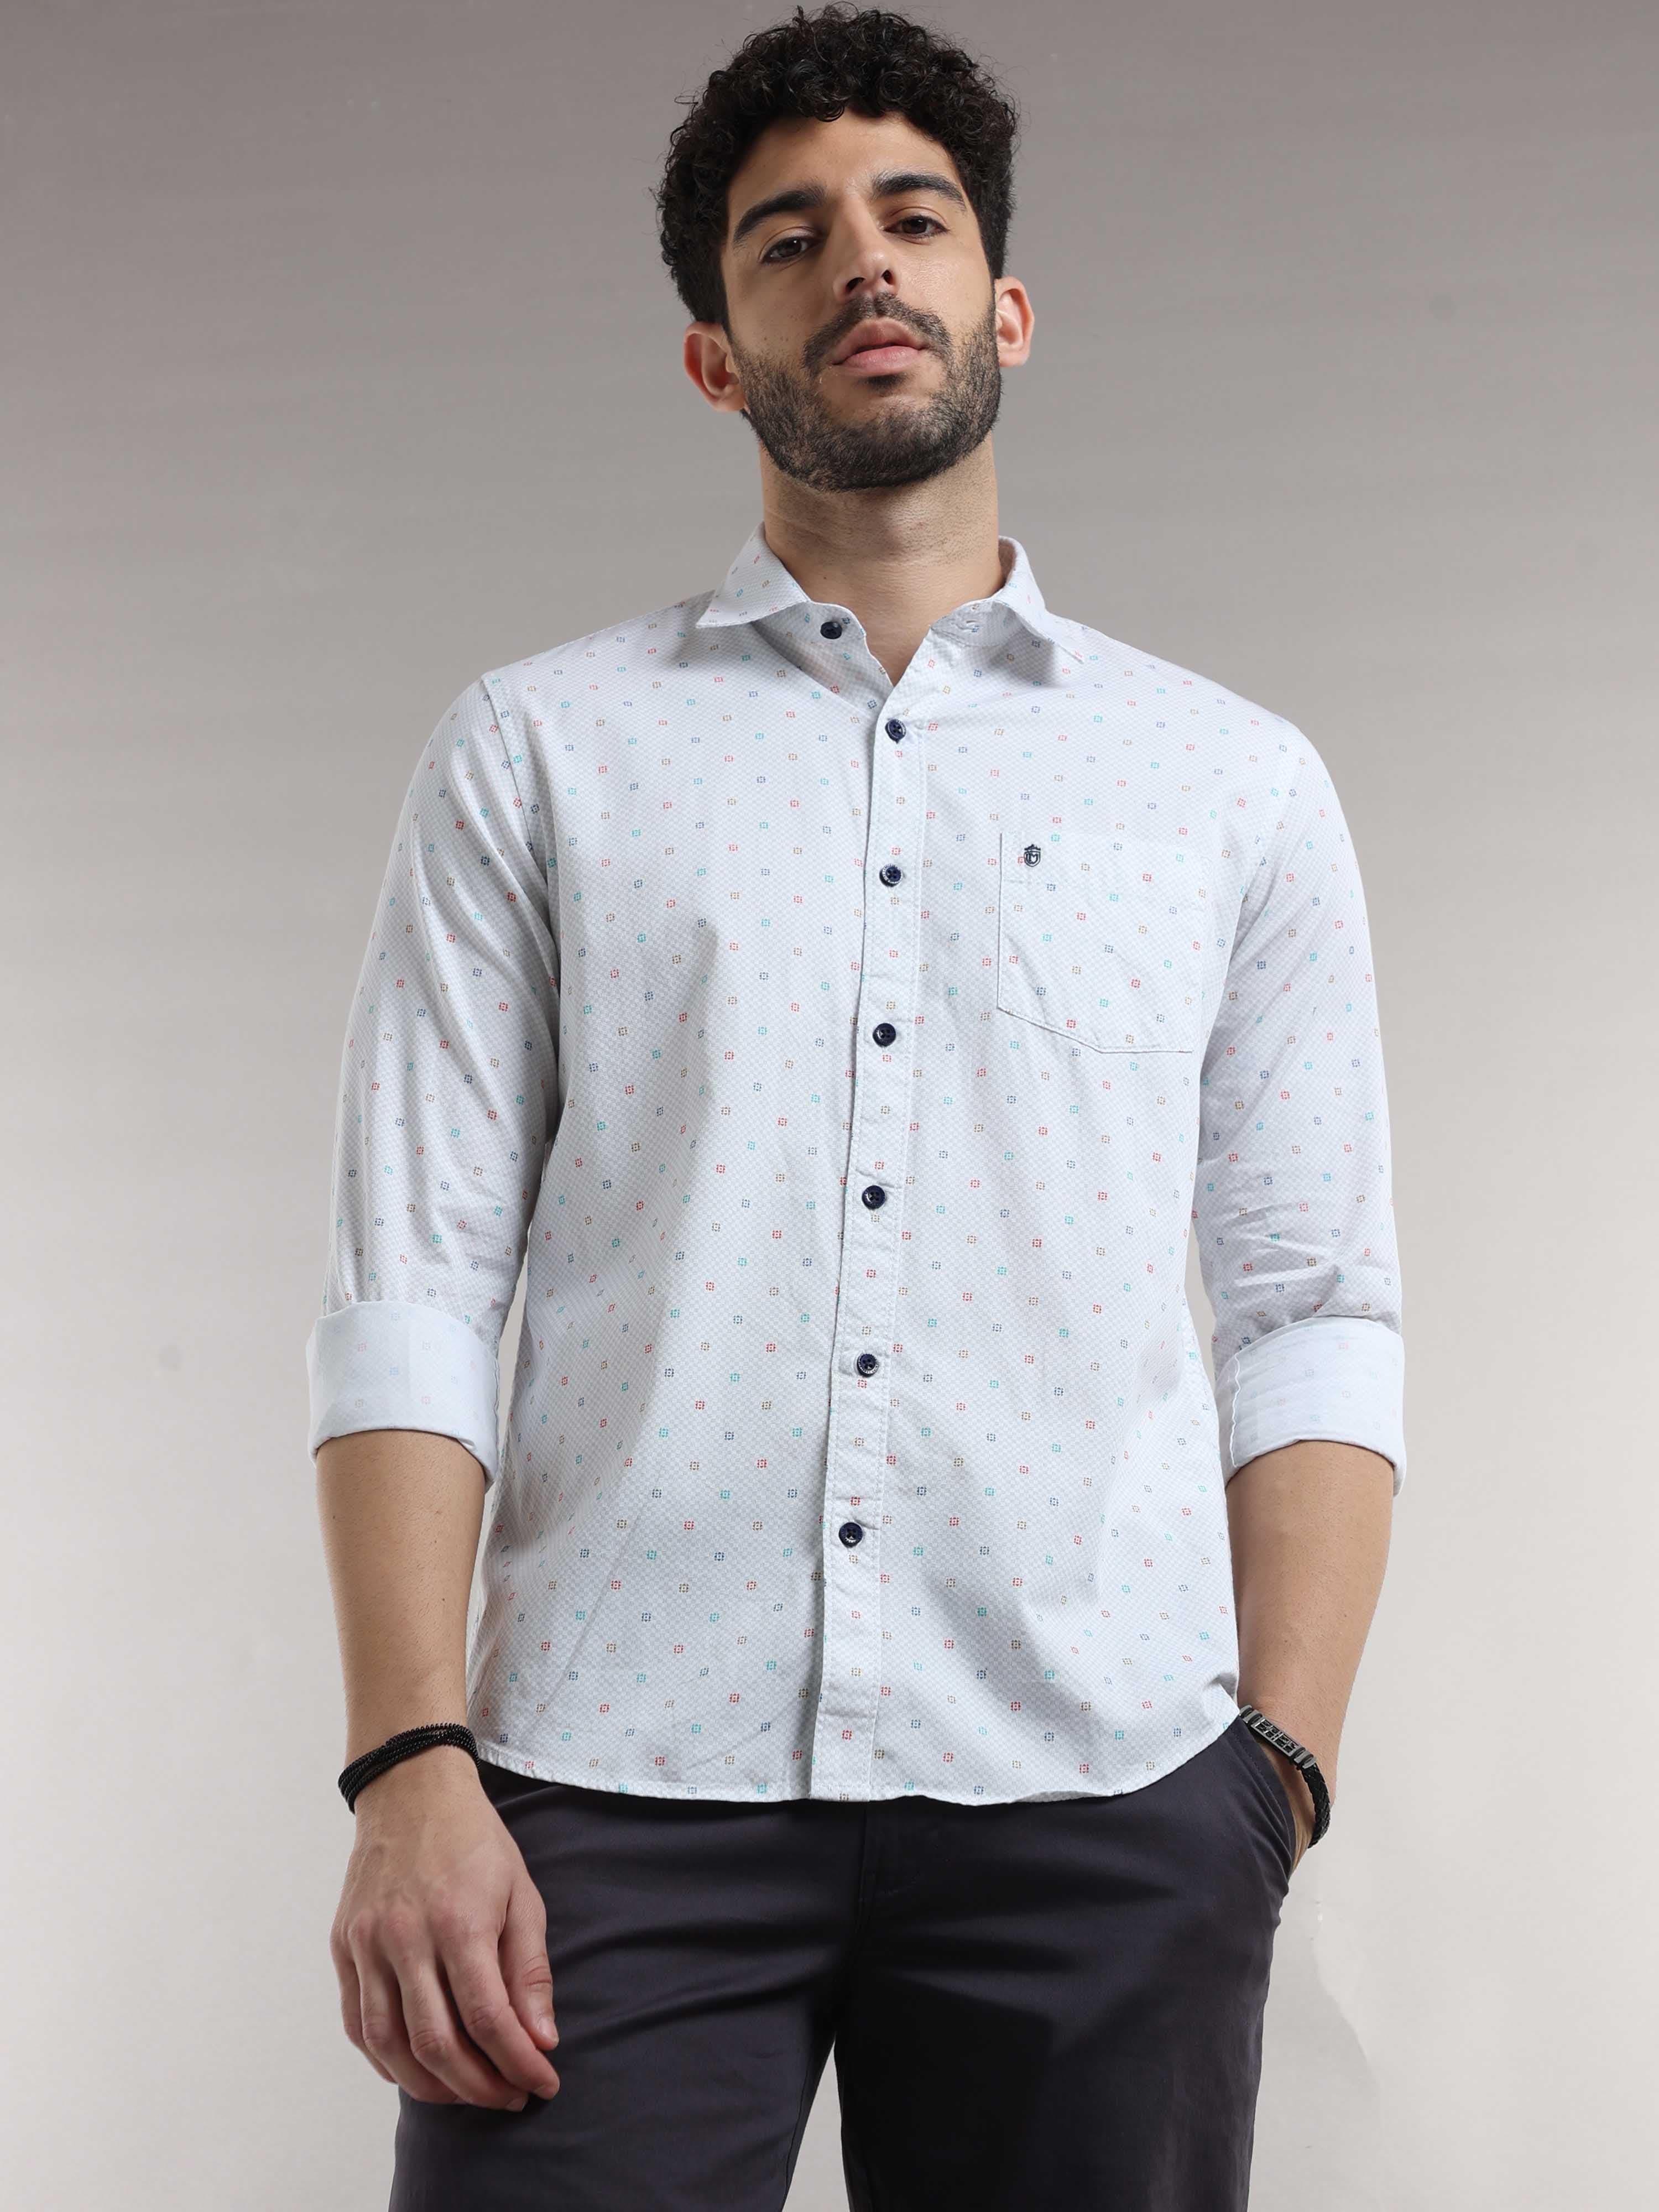 Shop Stylish White Printed Shirt Online at Great PriceRs. 1299.00